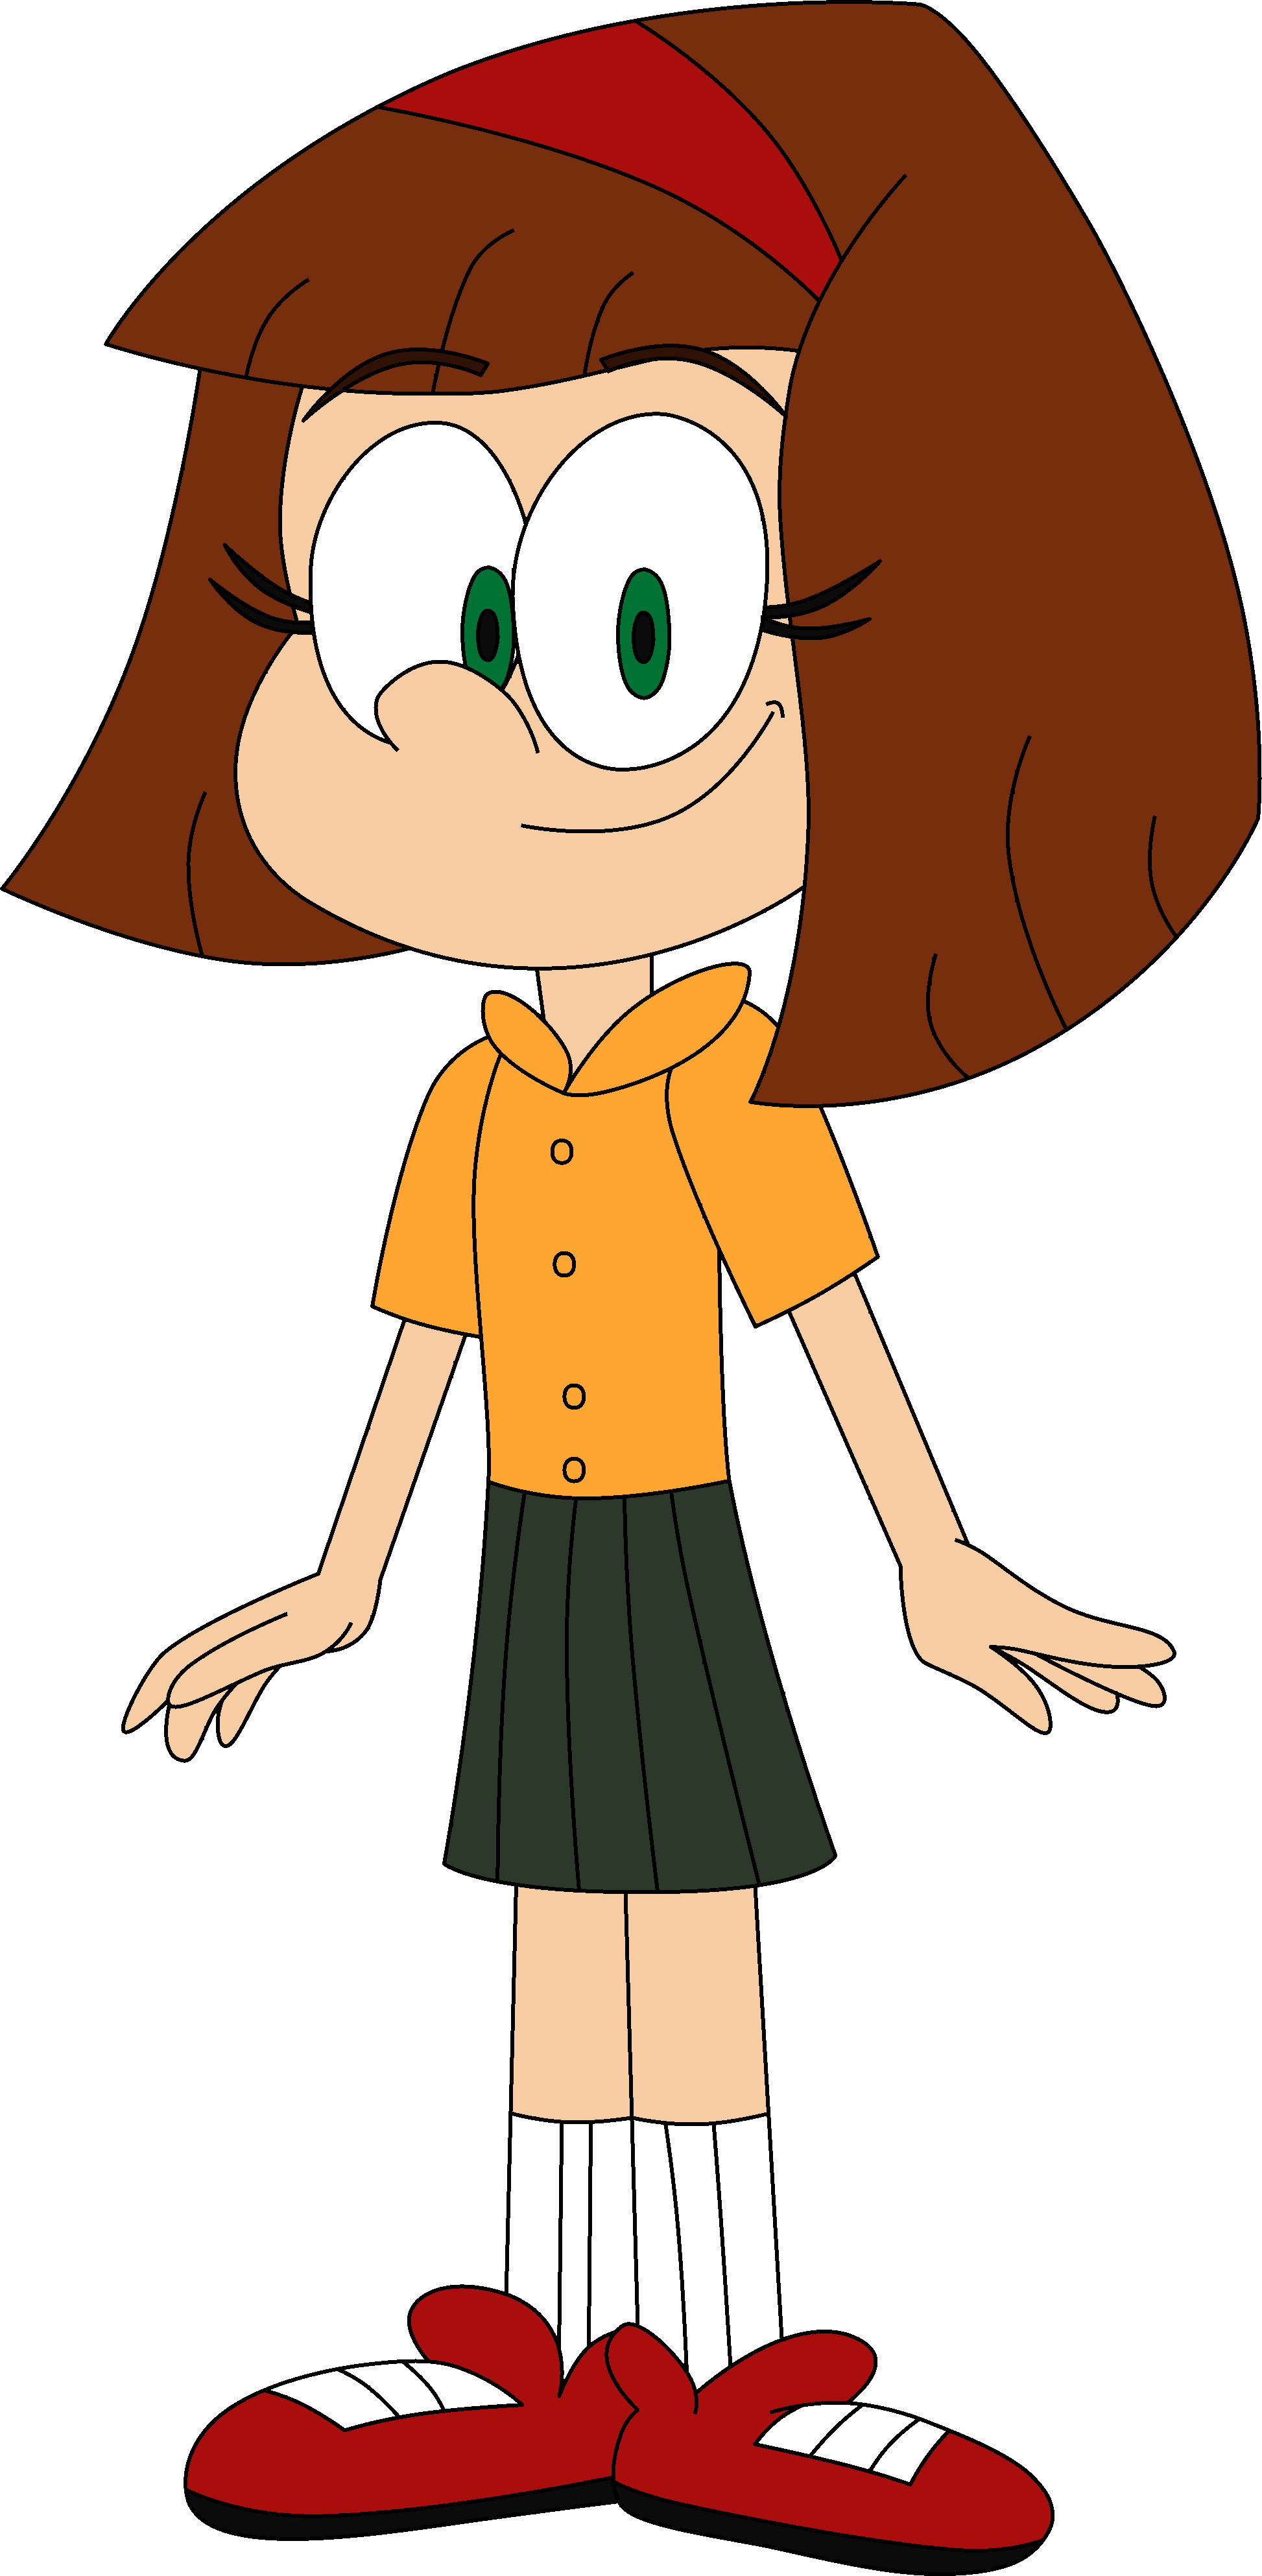 cartoon character with brown hair and green eyes